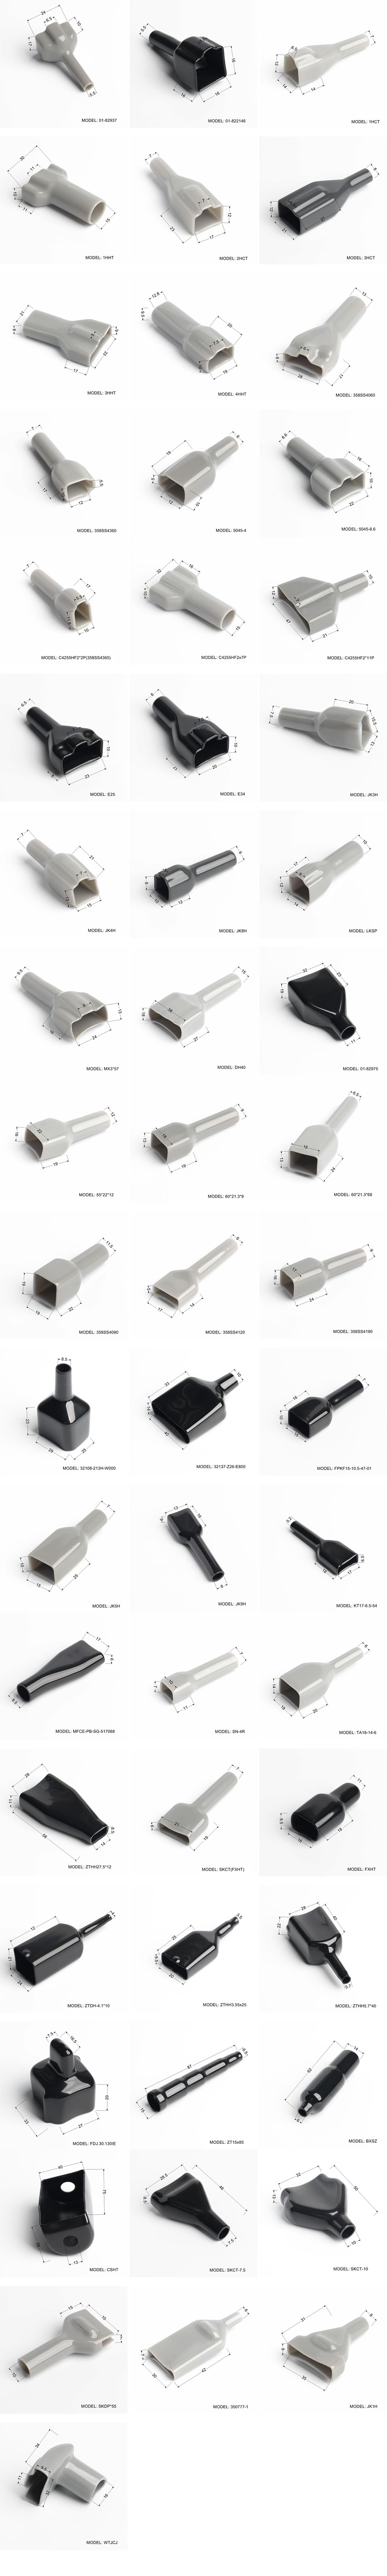 Rubber Connector Cover,connector covers, sleeve connector housing, connector cover, wire connector covers, auto harness connector covers,